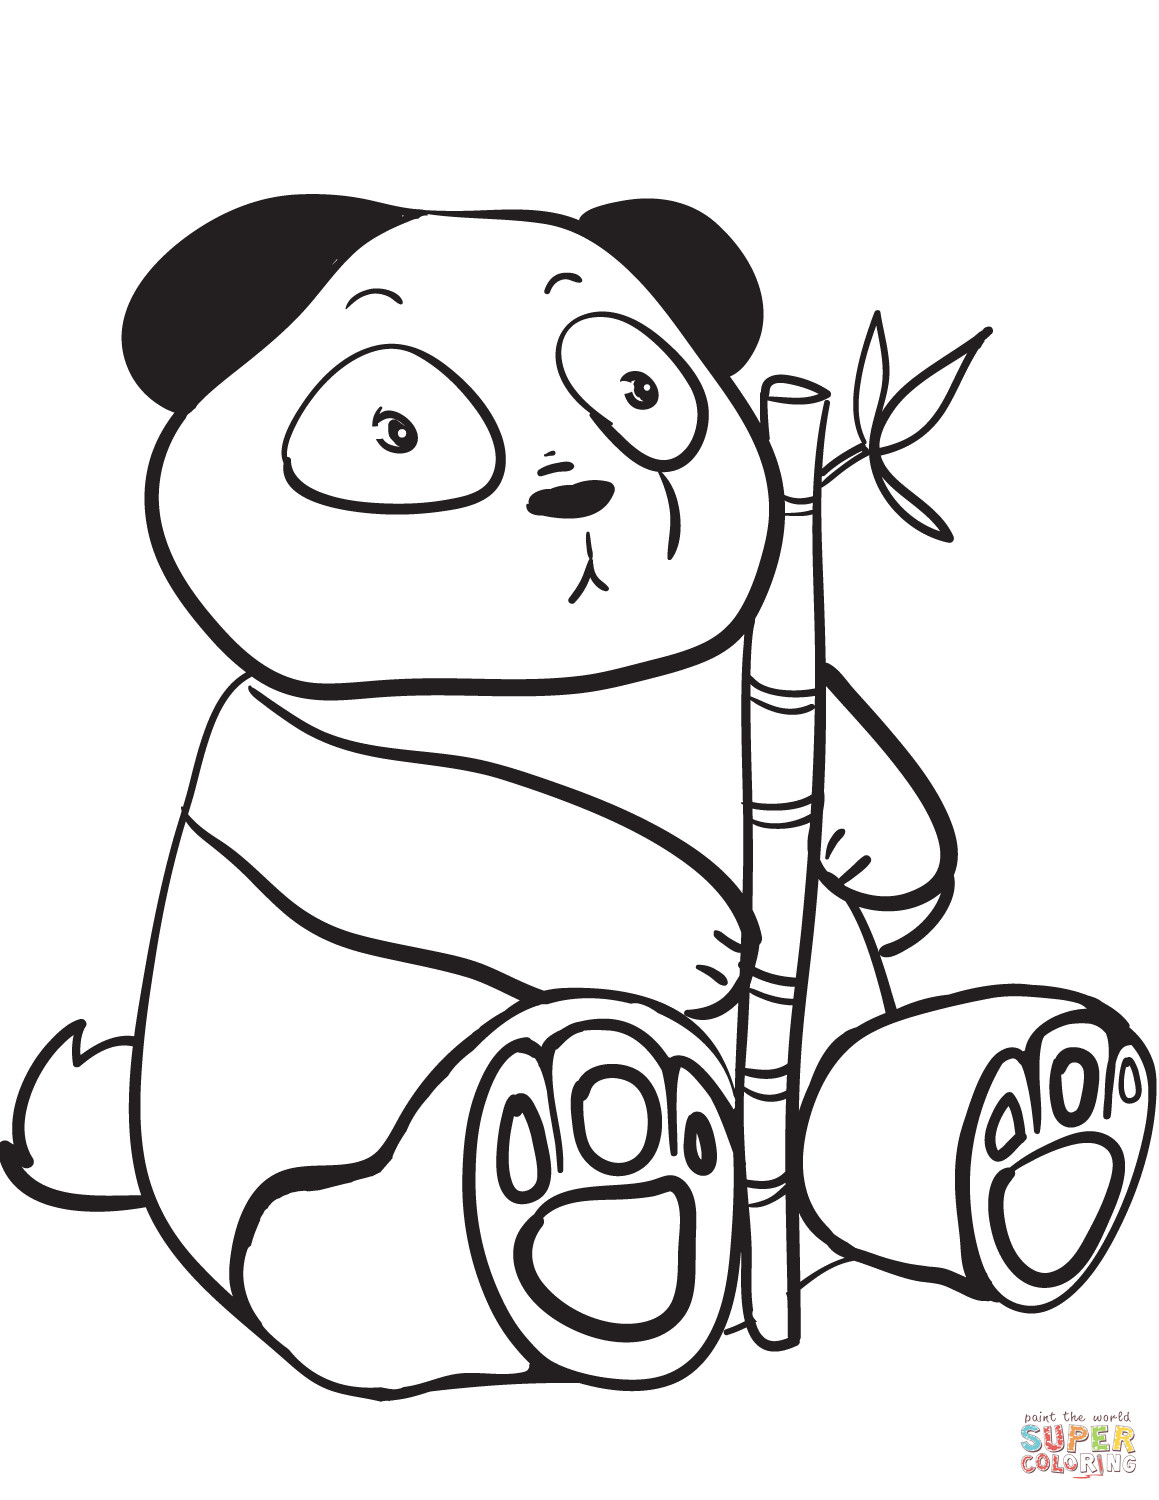 Panda Coloring Pages Printable
 Cute Panda Holding a Bamboo Branch coloring page